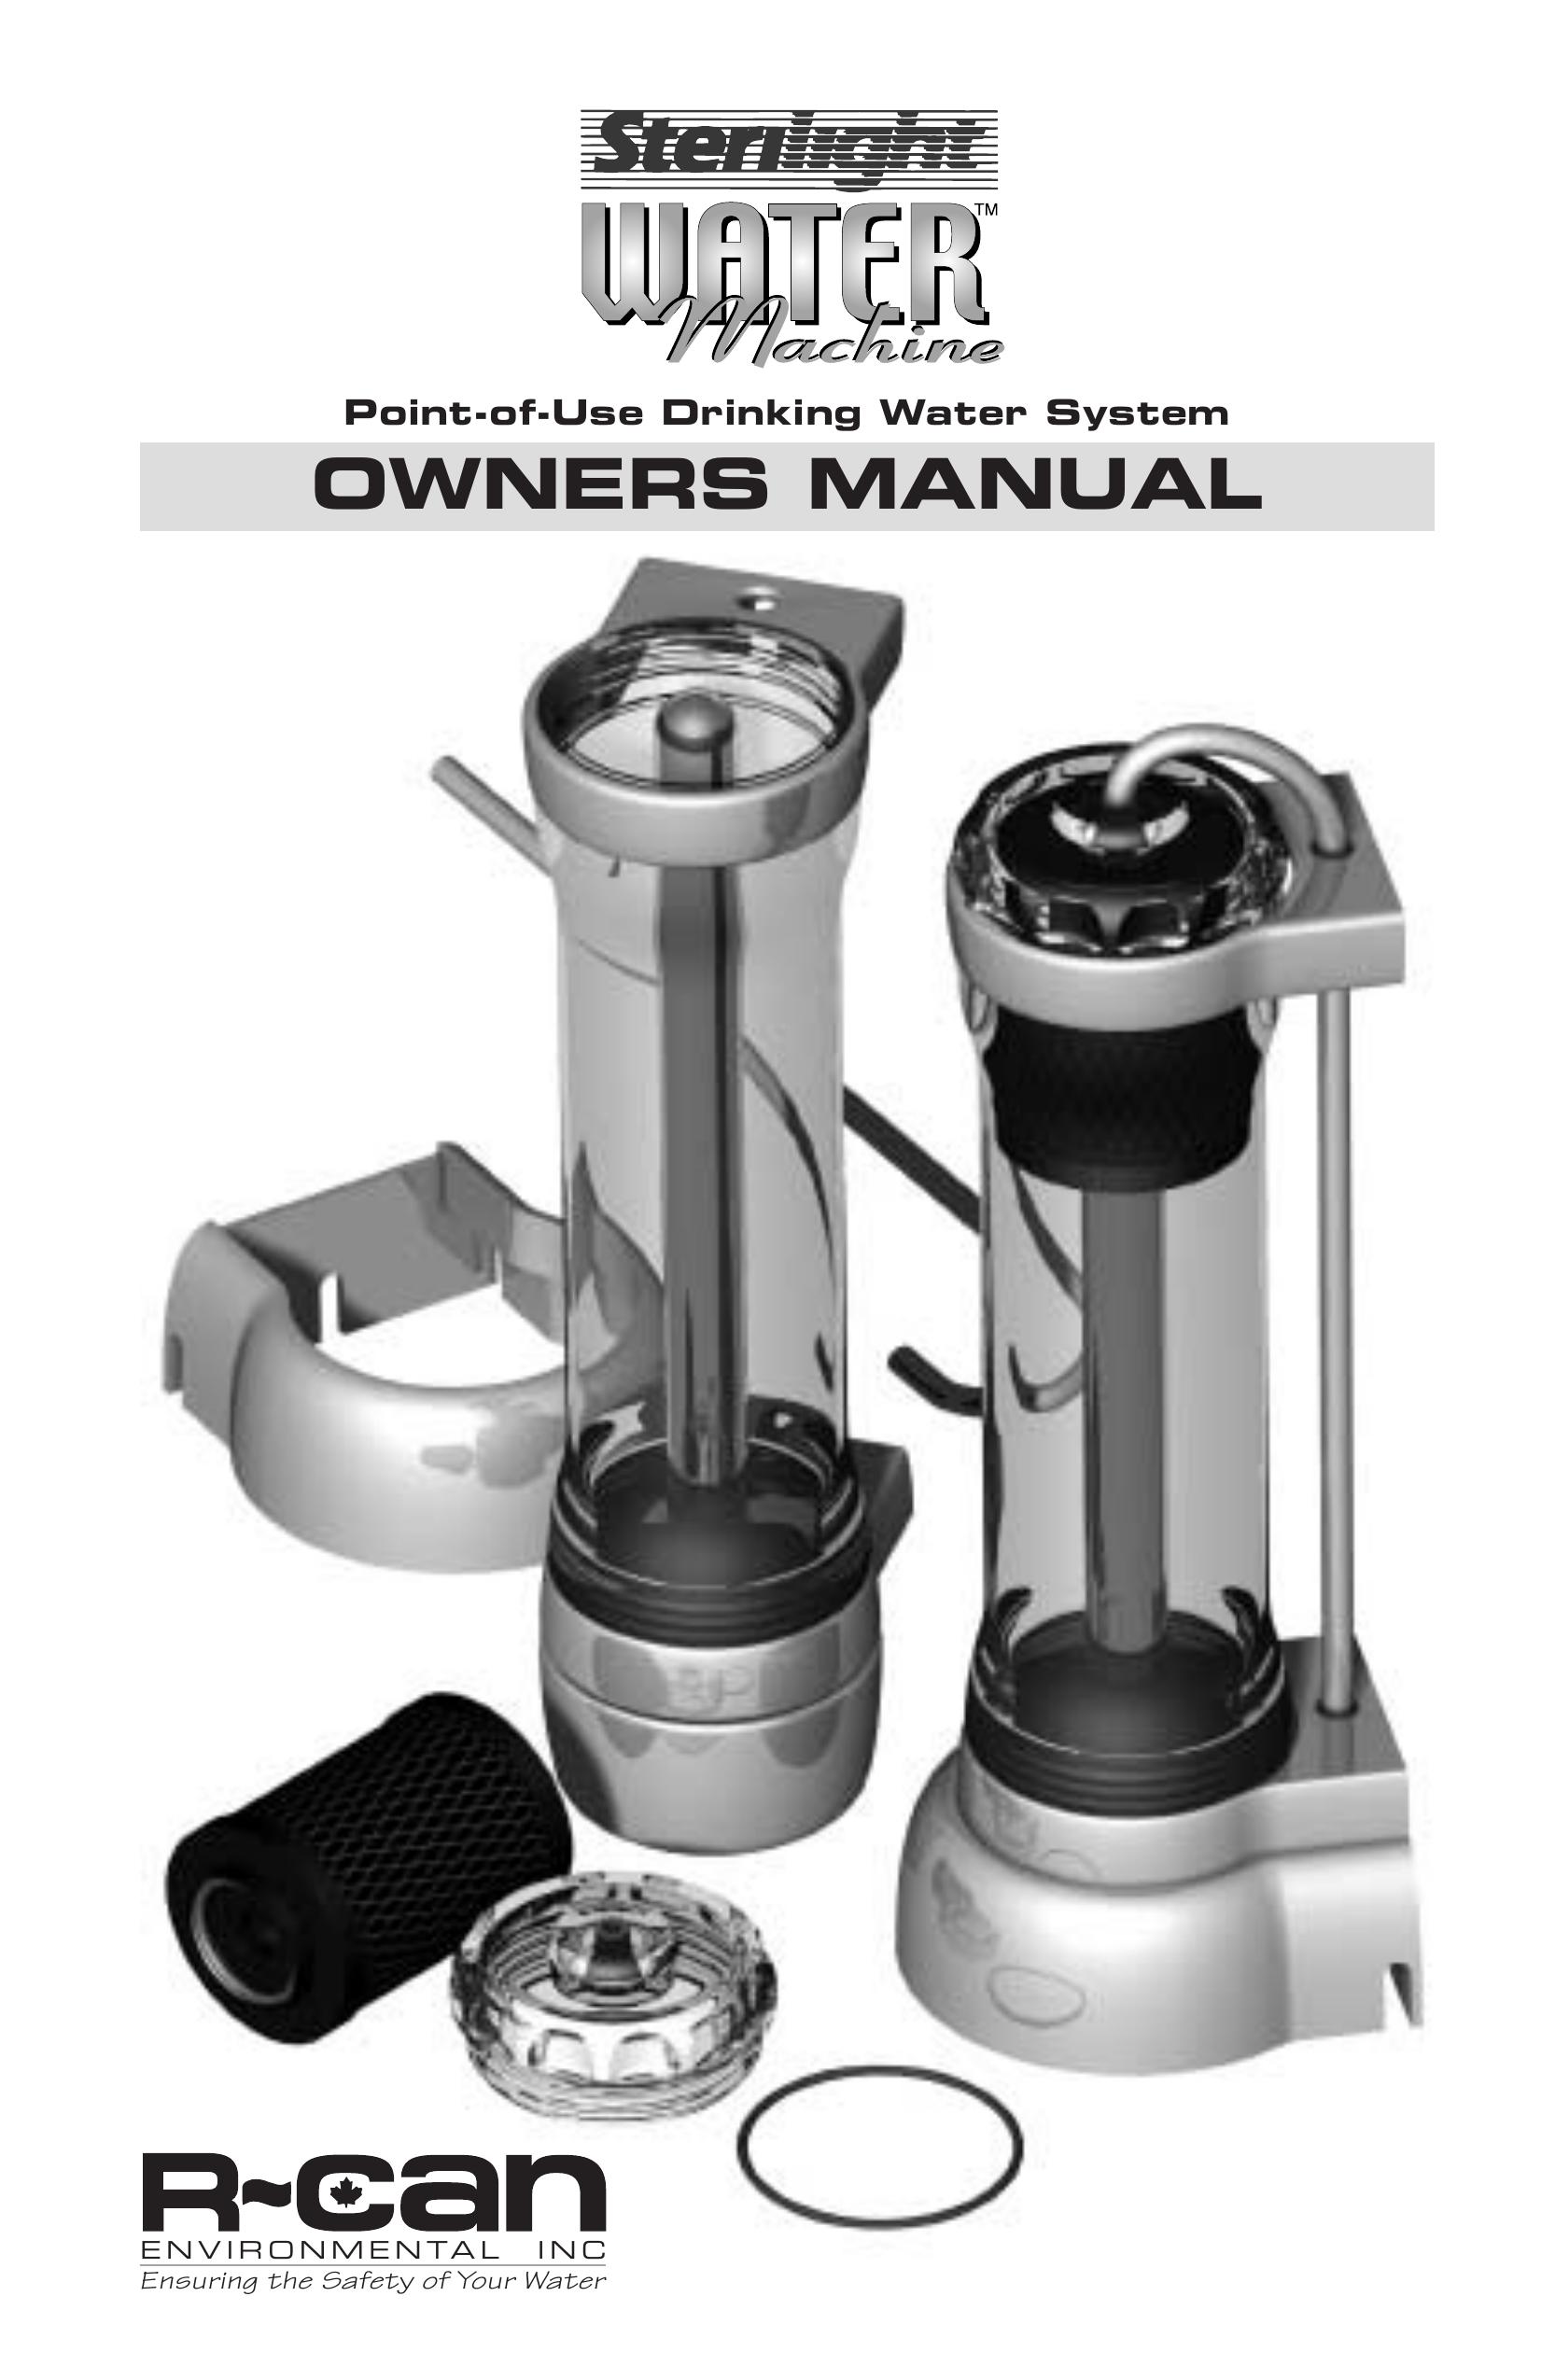 Sterilite Point-of-Use Drinking Water System Water Dispenser User Manual